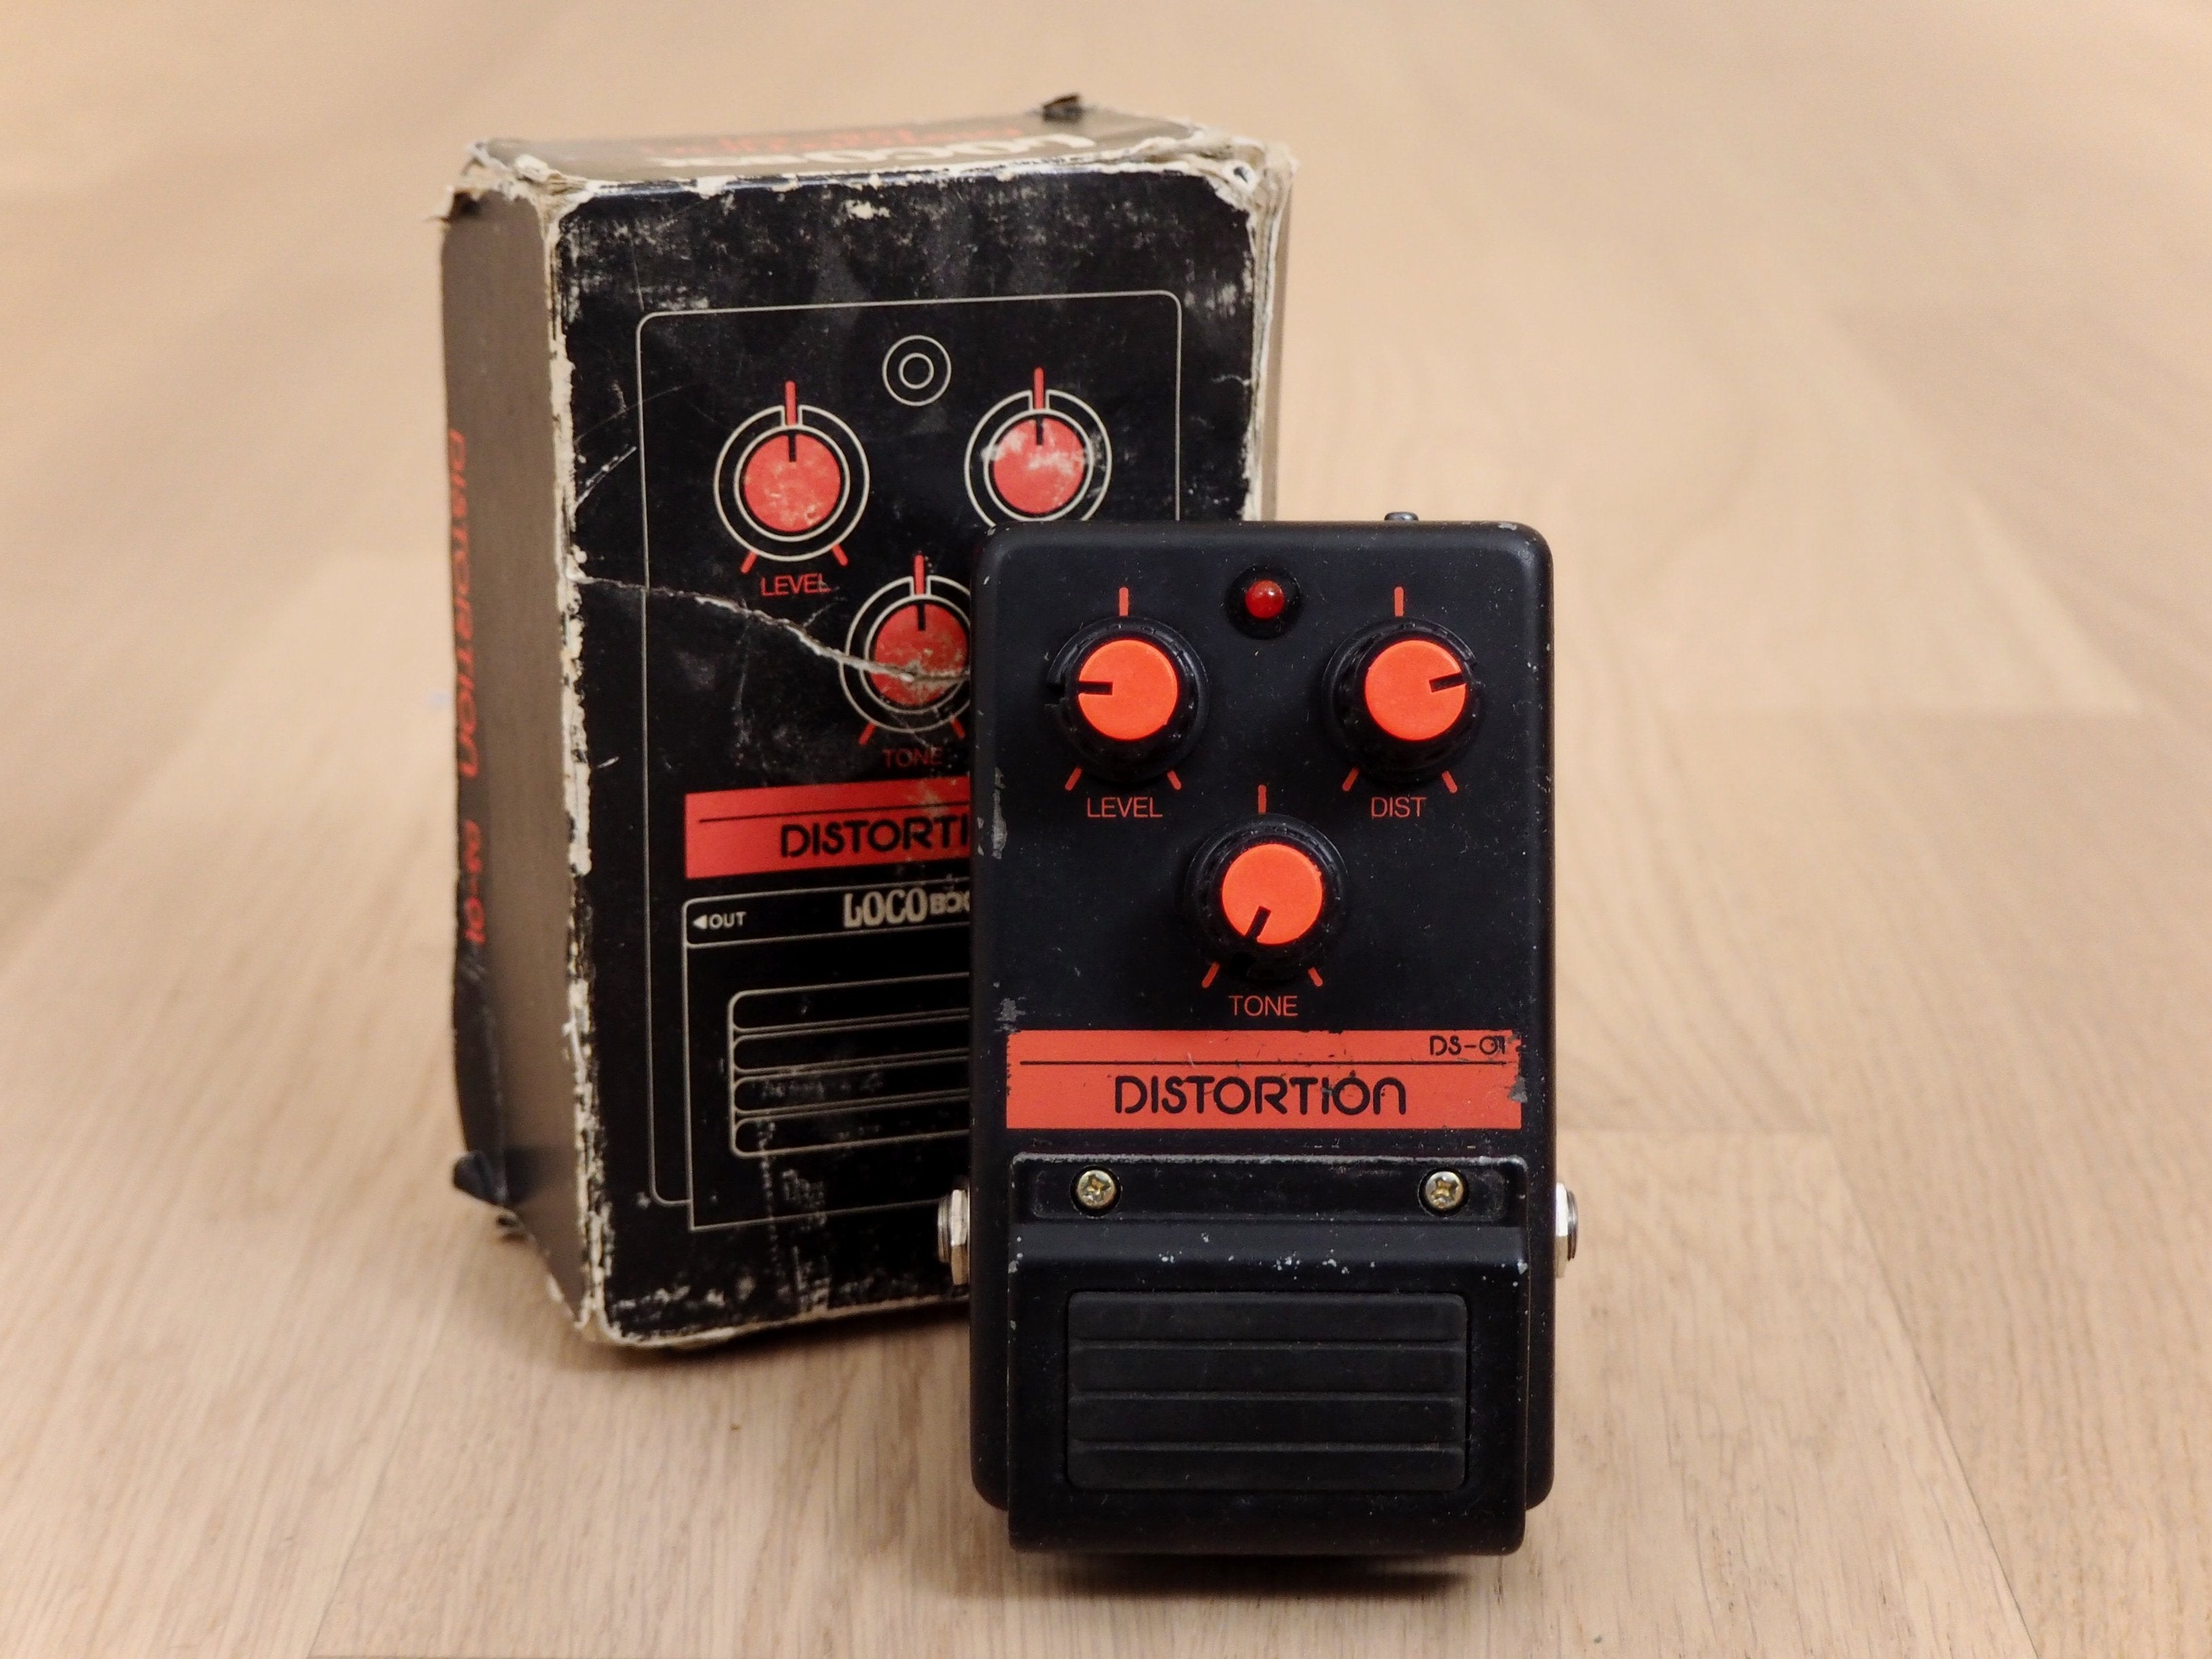 1980s Loco Box Distortion DS-01 Vintage Analog Guitar Effects Pedal w/ Box, Aria Japan